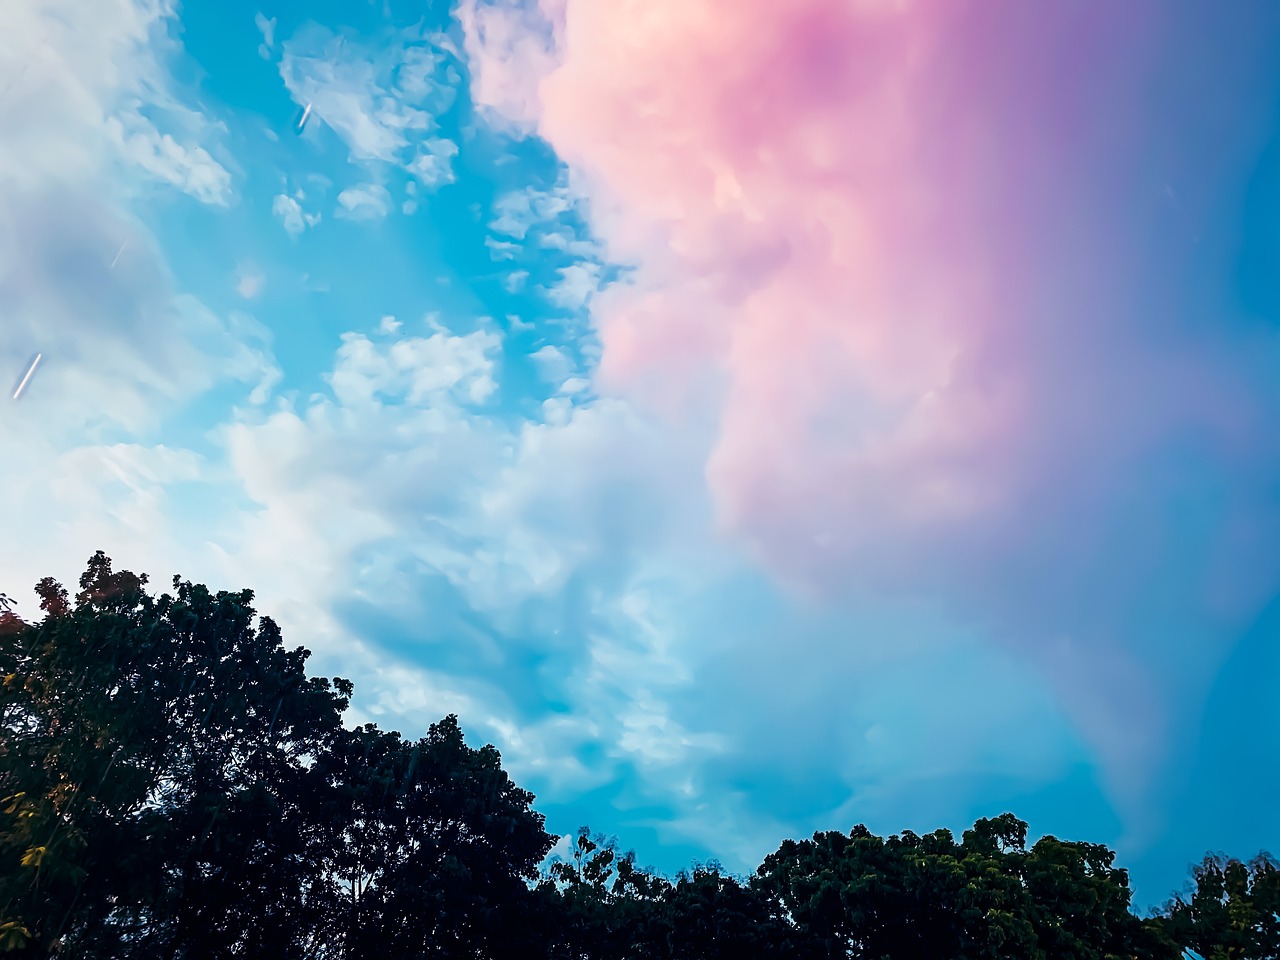 there is a plane that is flying in the sky, inspired by Maxfield Parrish, aestheticism, (((colorful clouds))), blue and pink colour splash, over the tree tops, shot with premium dslr camera